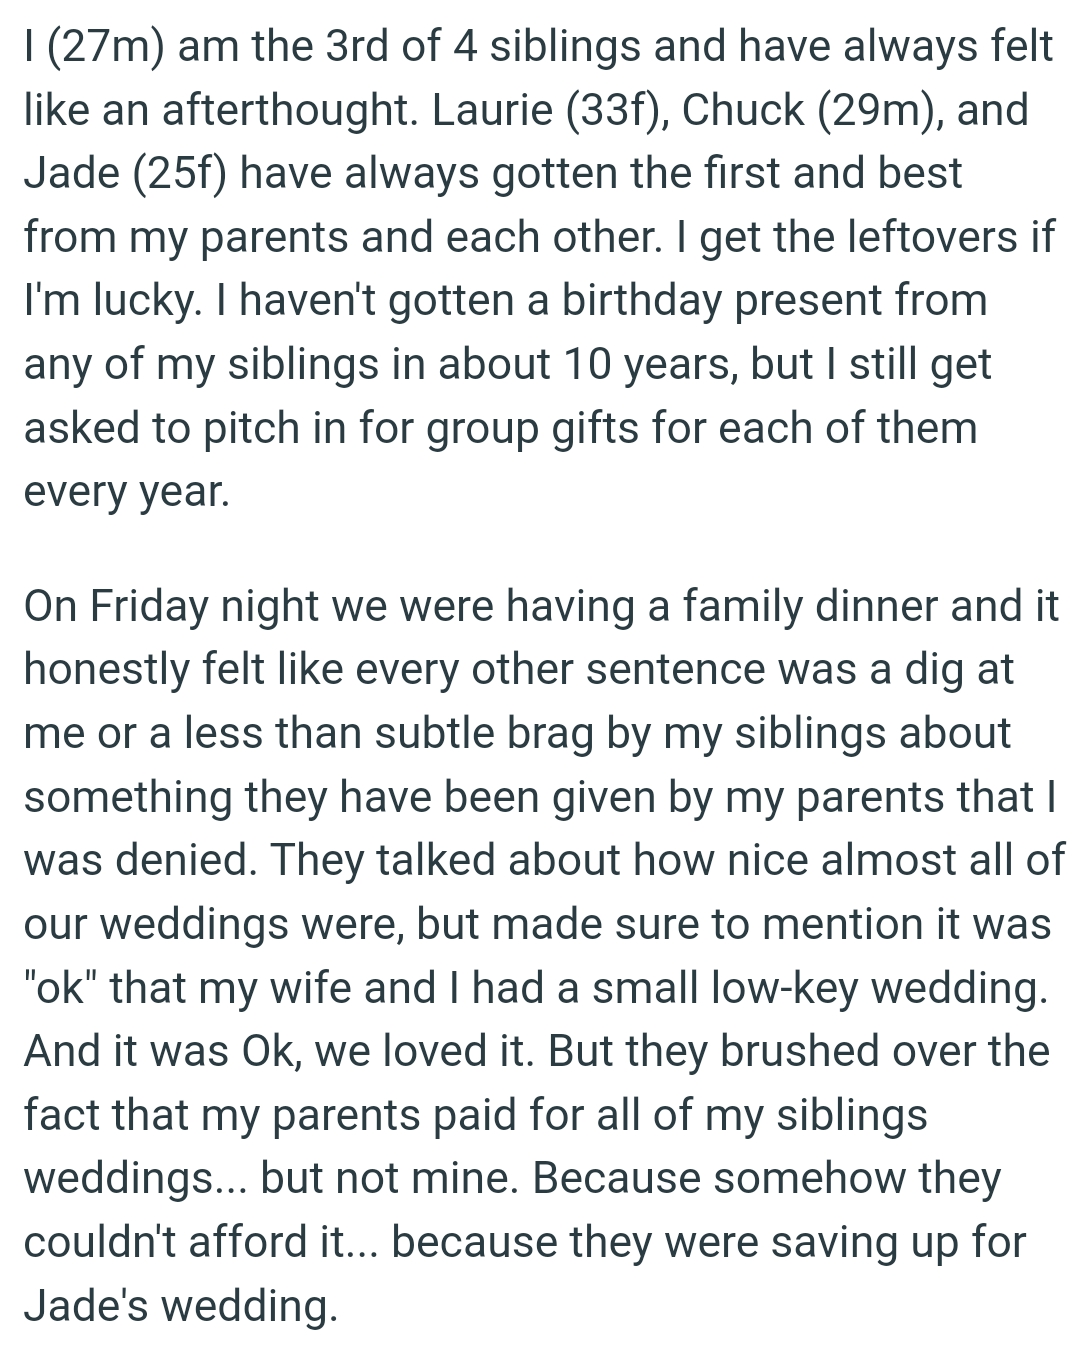 OP's siblings talked about how nice almost all of their weddings were